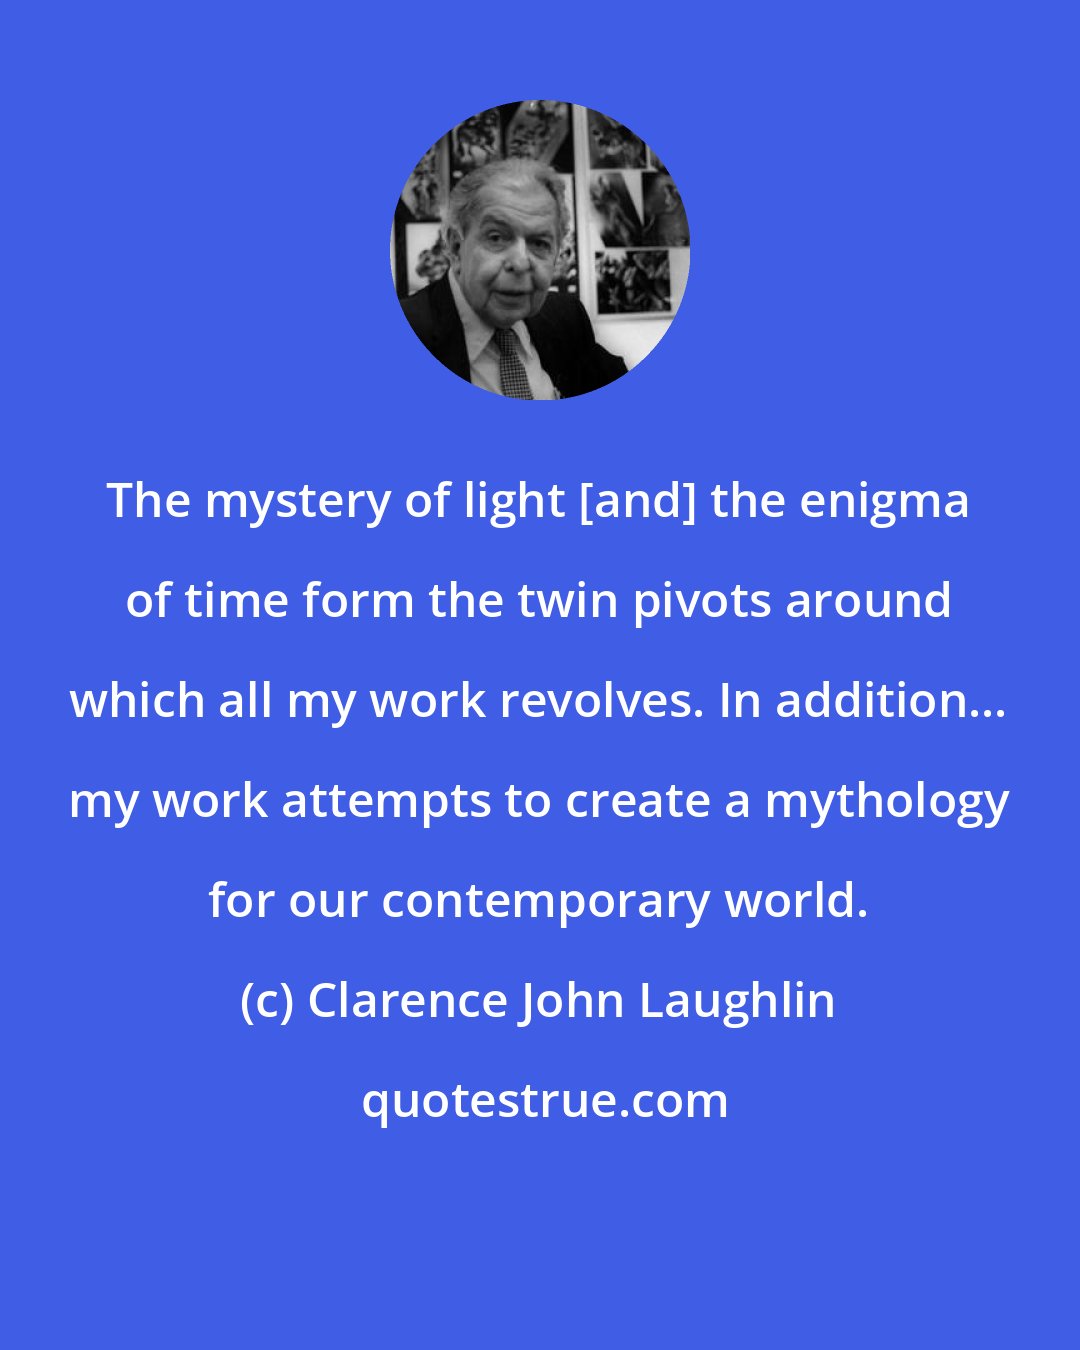 Clarence John Laughlin: The mystery of light [and] the enigma of time form the twin pivots around which all my work revolves. In addition... my work attempts to create a mythology for our contemporary world.